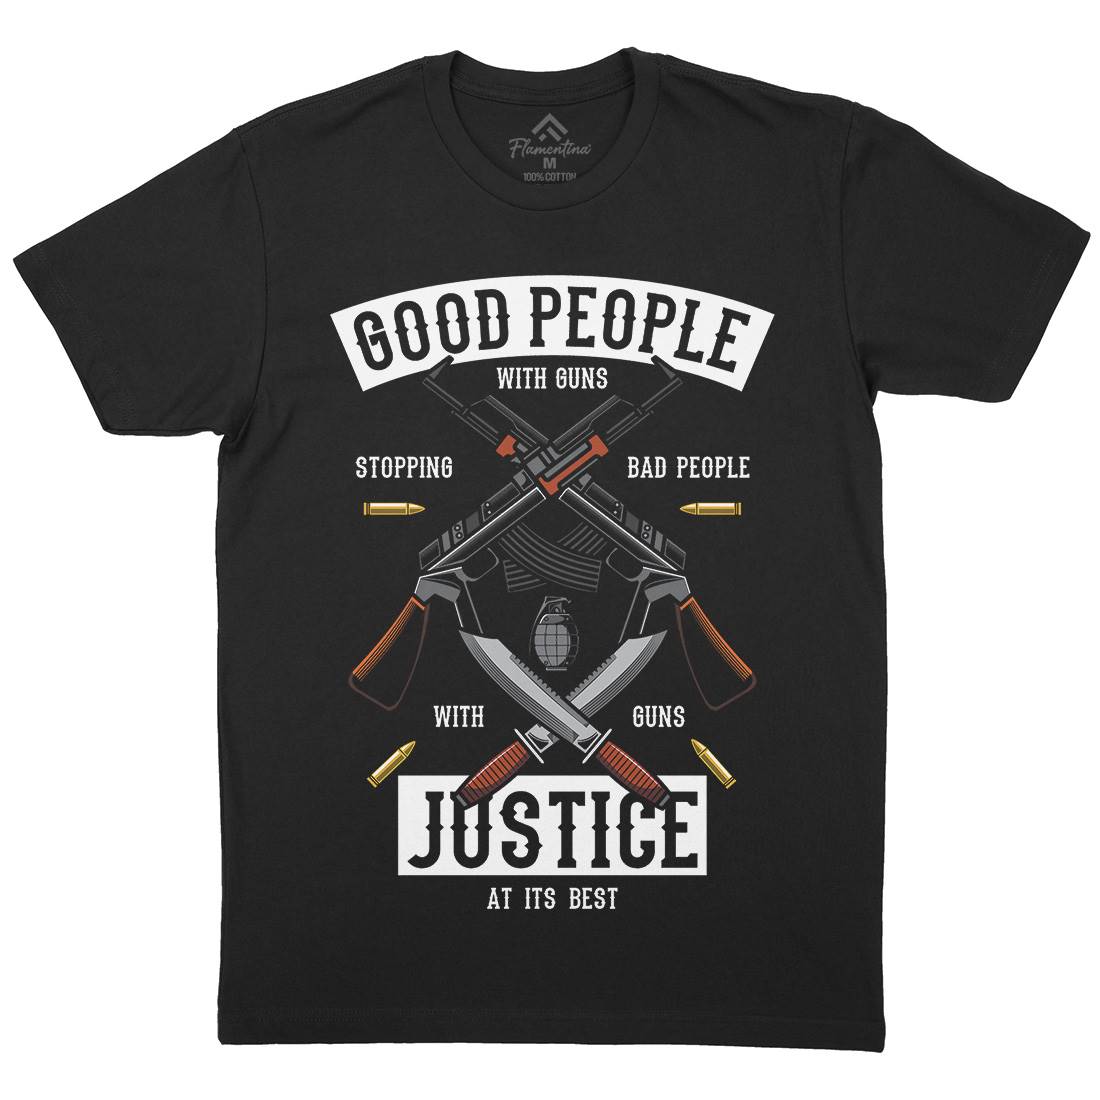 Good People With Guns Mens Crew Neck T-Shirt American C367